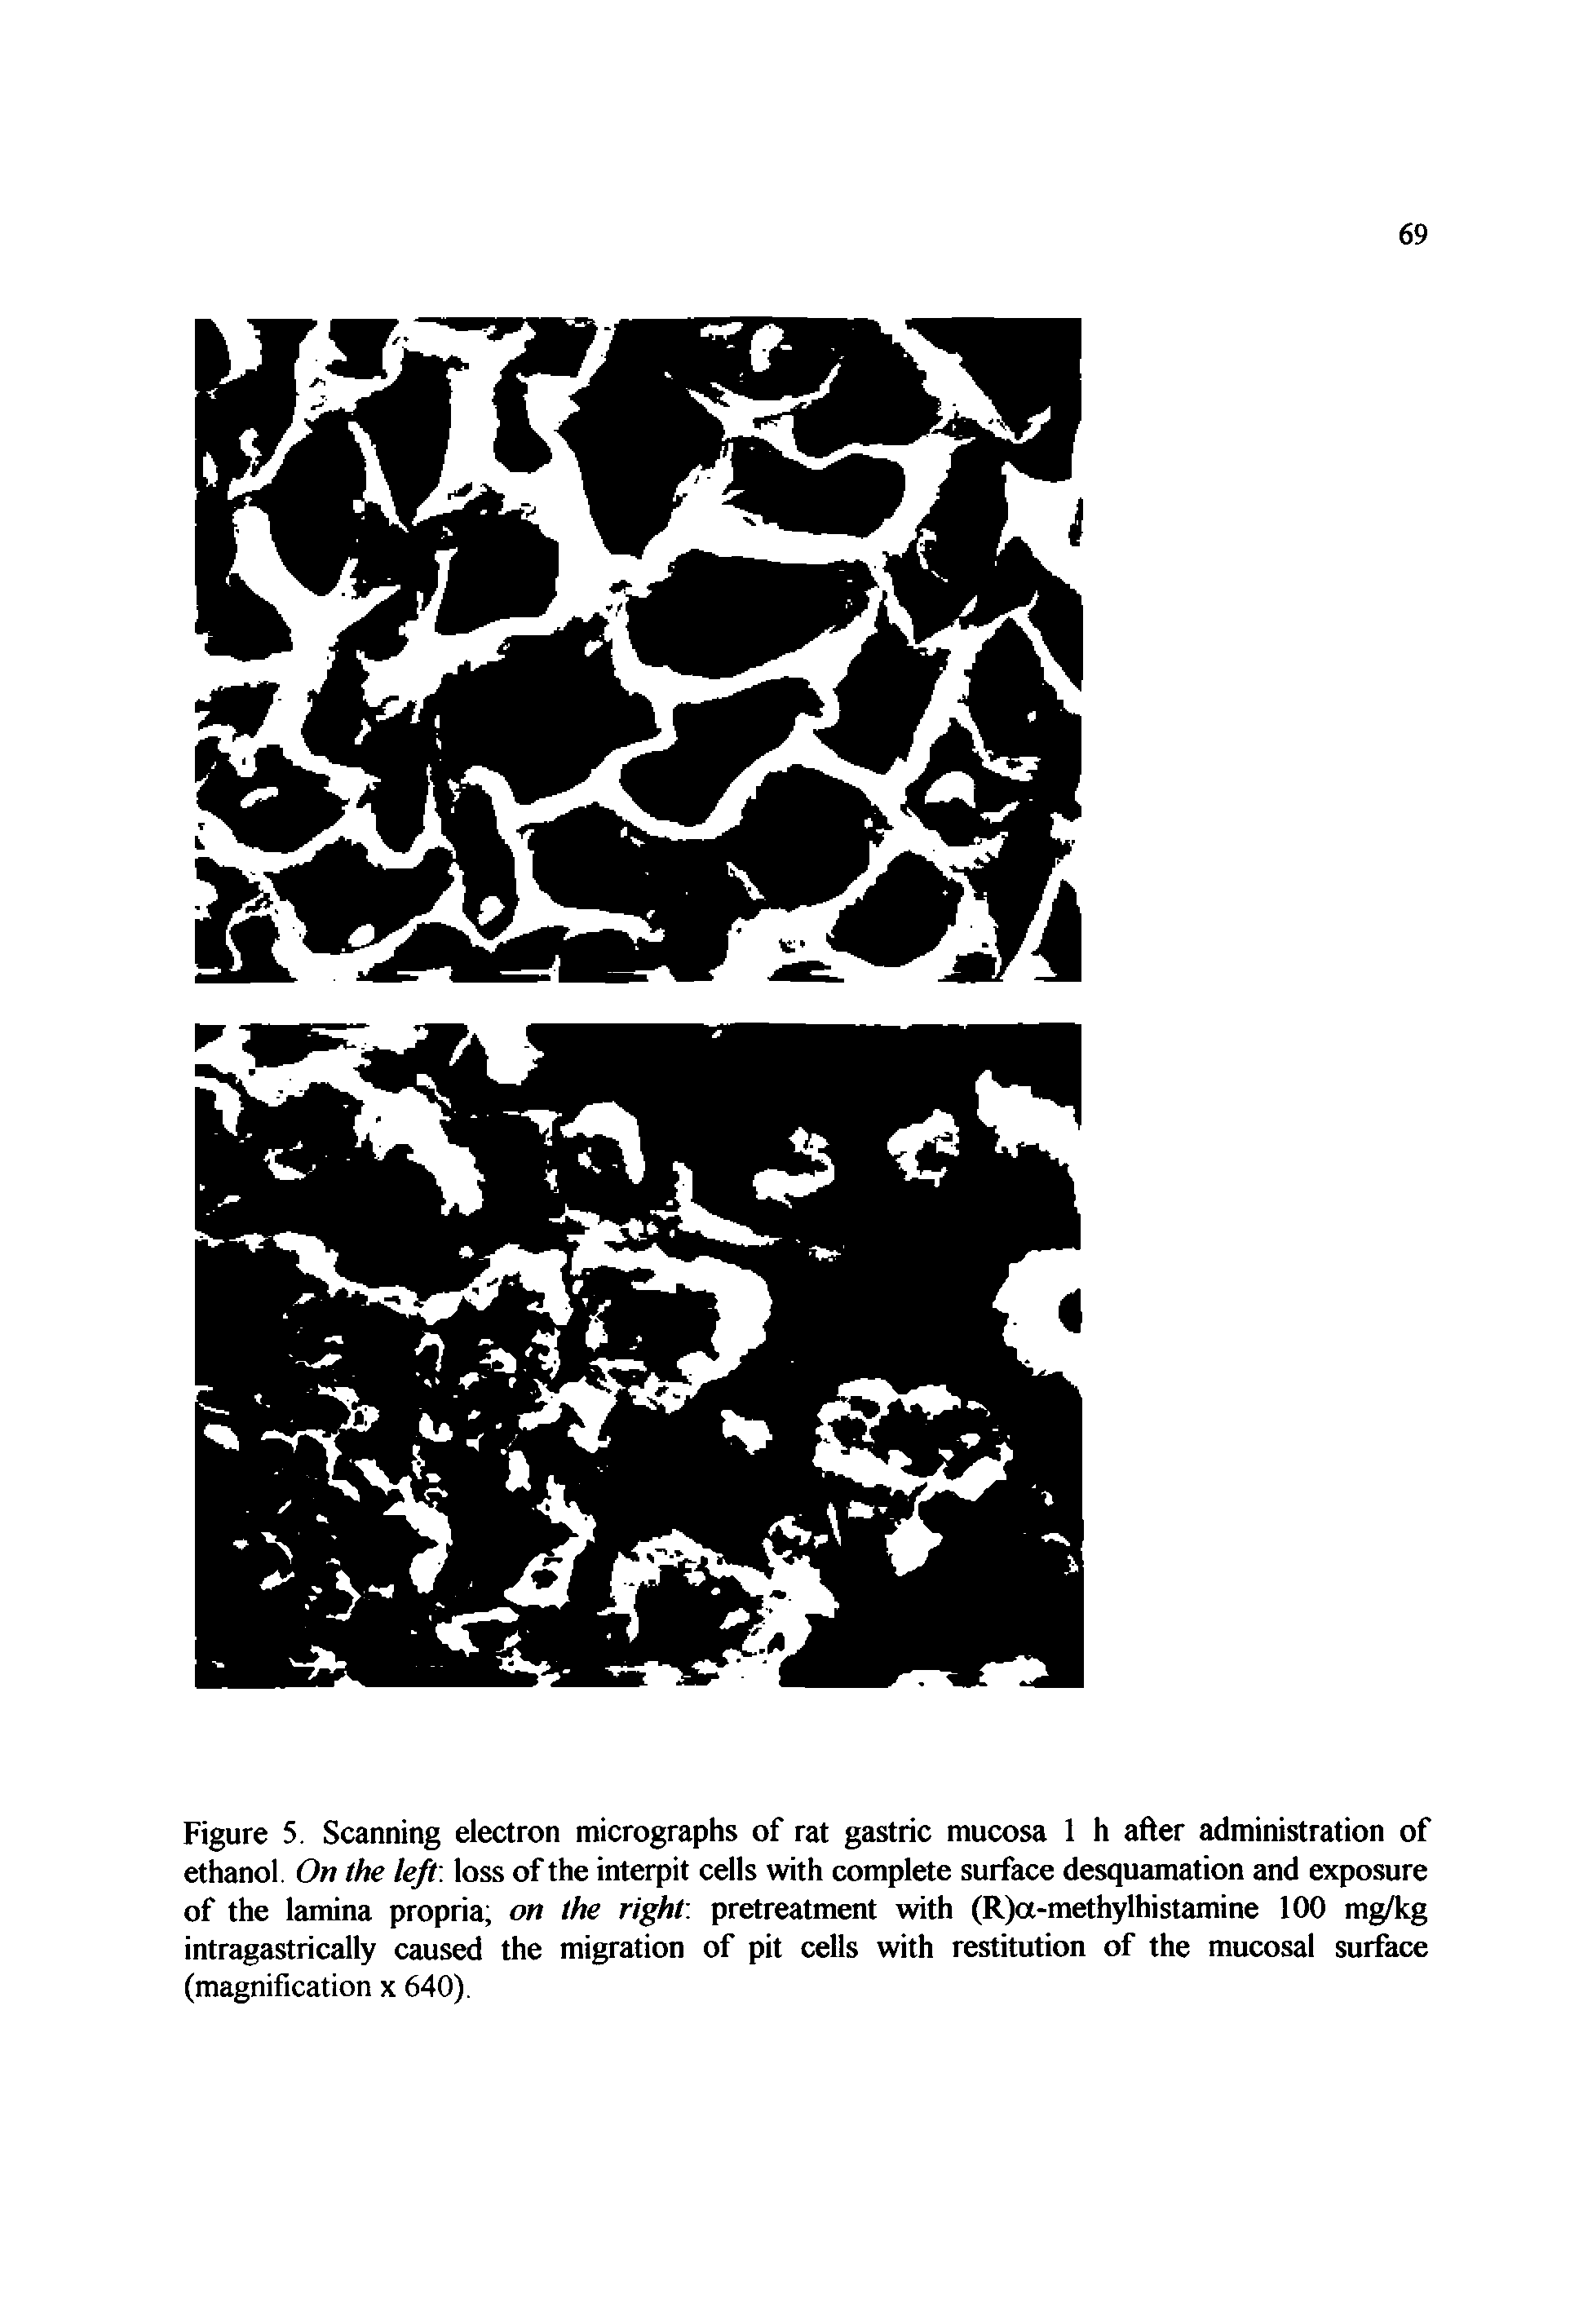 Figure 5. Scanning electron micrographs of rat gastric mucosa 1 h after administration of ethanol On the left, loss of the interpit cells with complete surface desquamation and exposure of the lamina propria on the right, pretreatment with (R)a-methylhistamine 100 mg/kg intragastrically caused the migration of pit cells with restitution of the mucosal surface (magnification x 640).